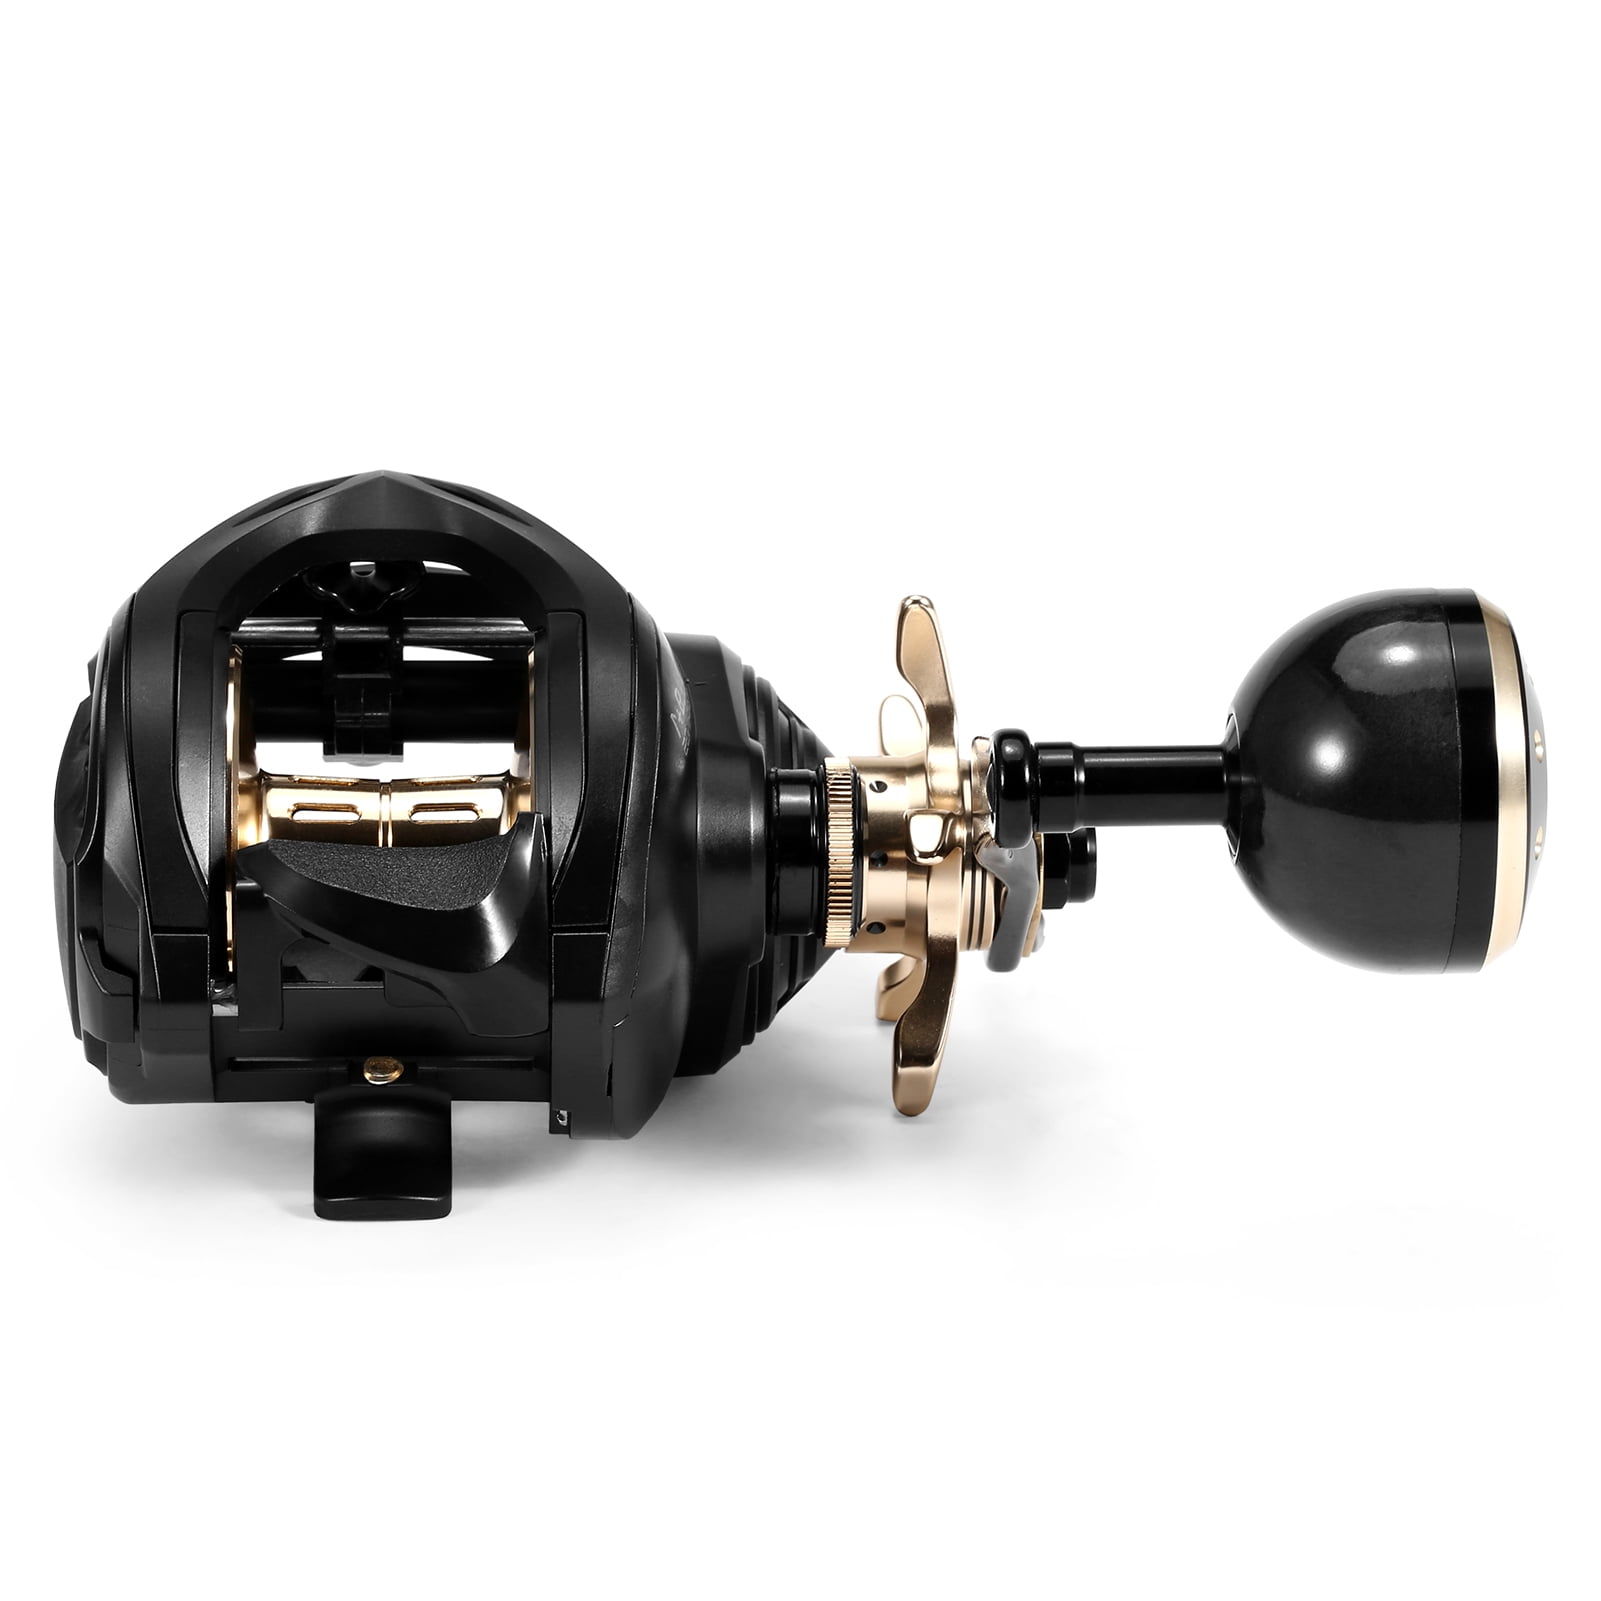  CAMEKOON Carbon 300 Baitcasting Fishing Reel, High Line  Capacity Baitcaster Reels, 6.3:1 Gear Ratio, 10+1 Stainless Steel Ball  Bearings, 10 Button Magnetic Brakes, Carbon Fiber Frame and Side Covers :  Sports & Outdoors